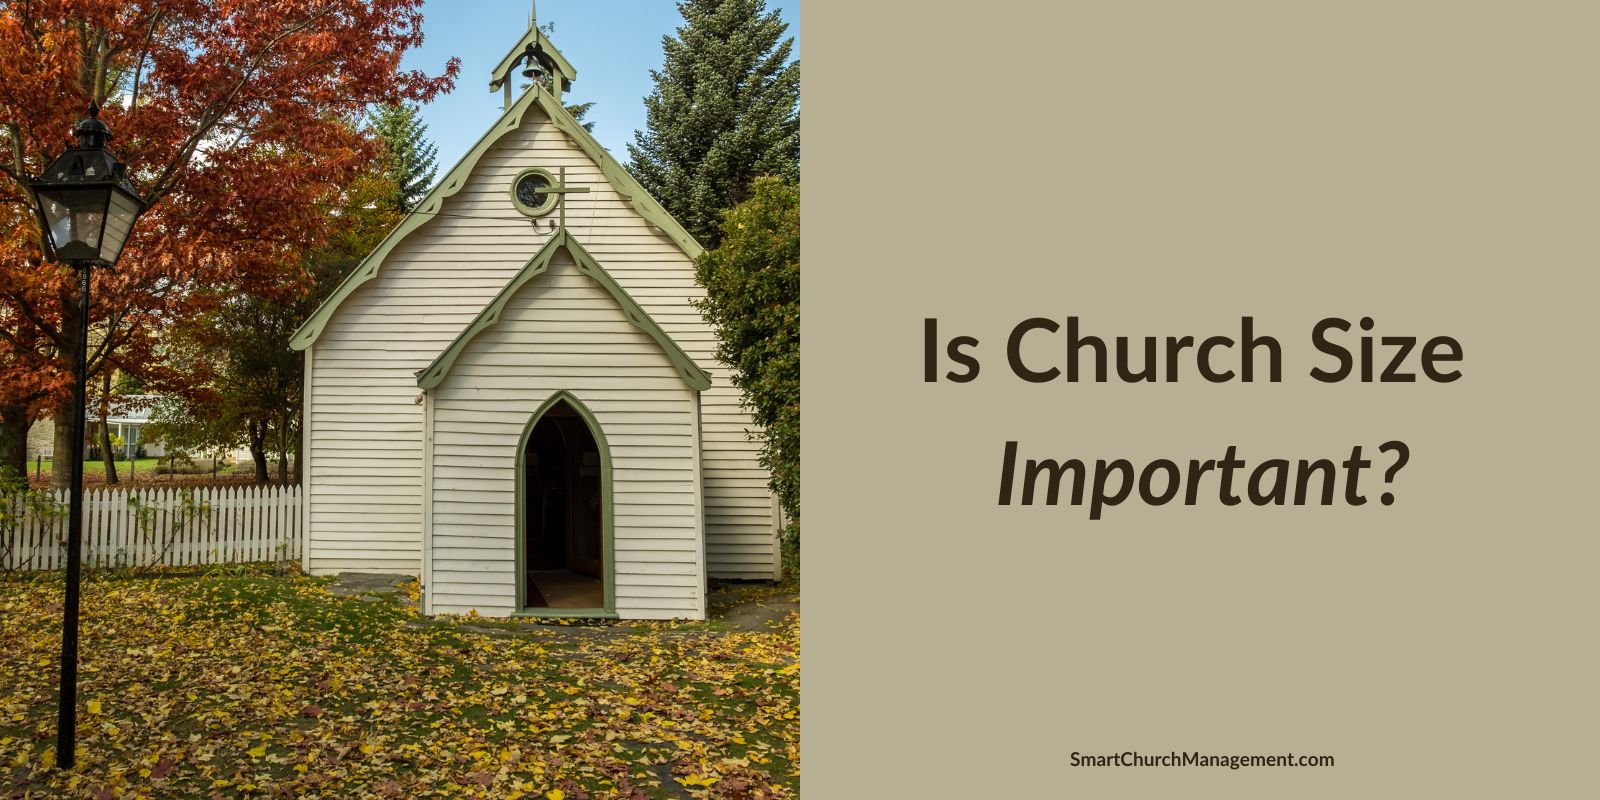 Is church size important?